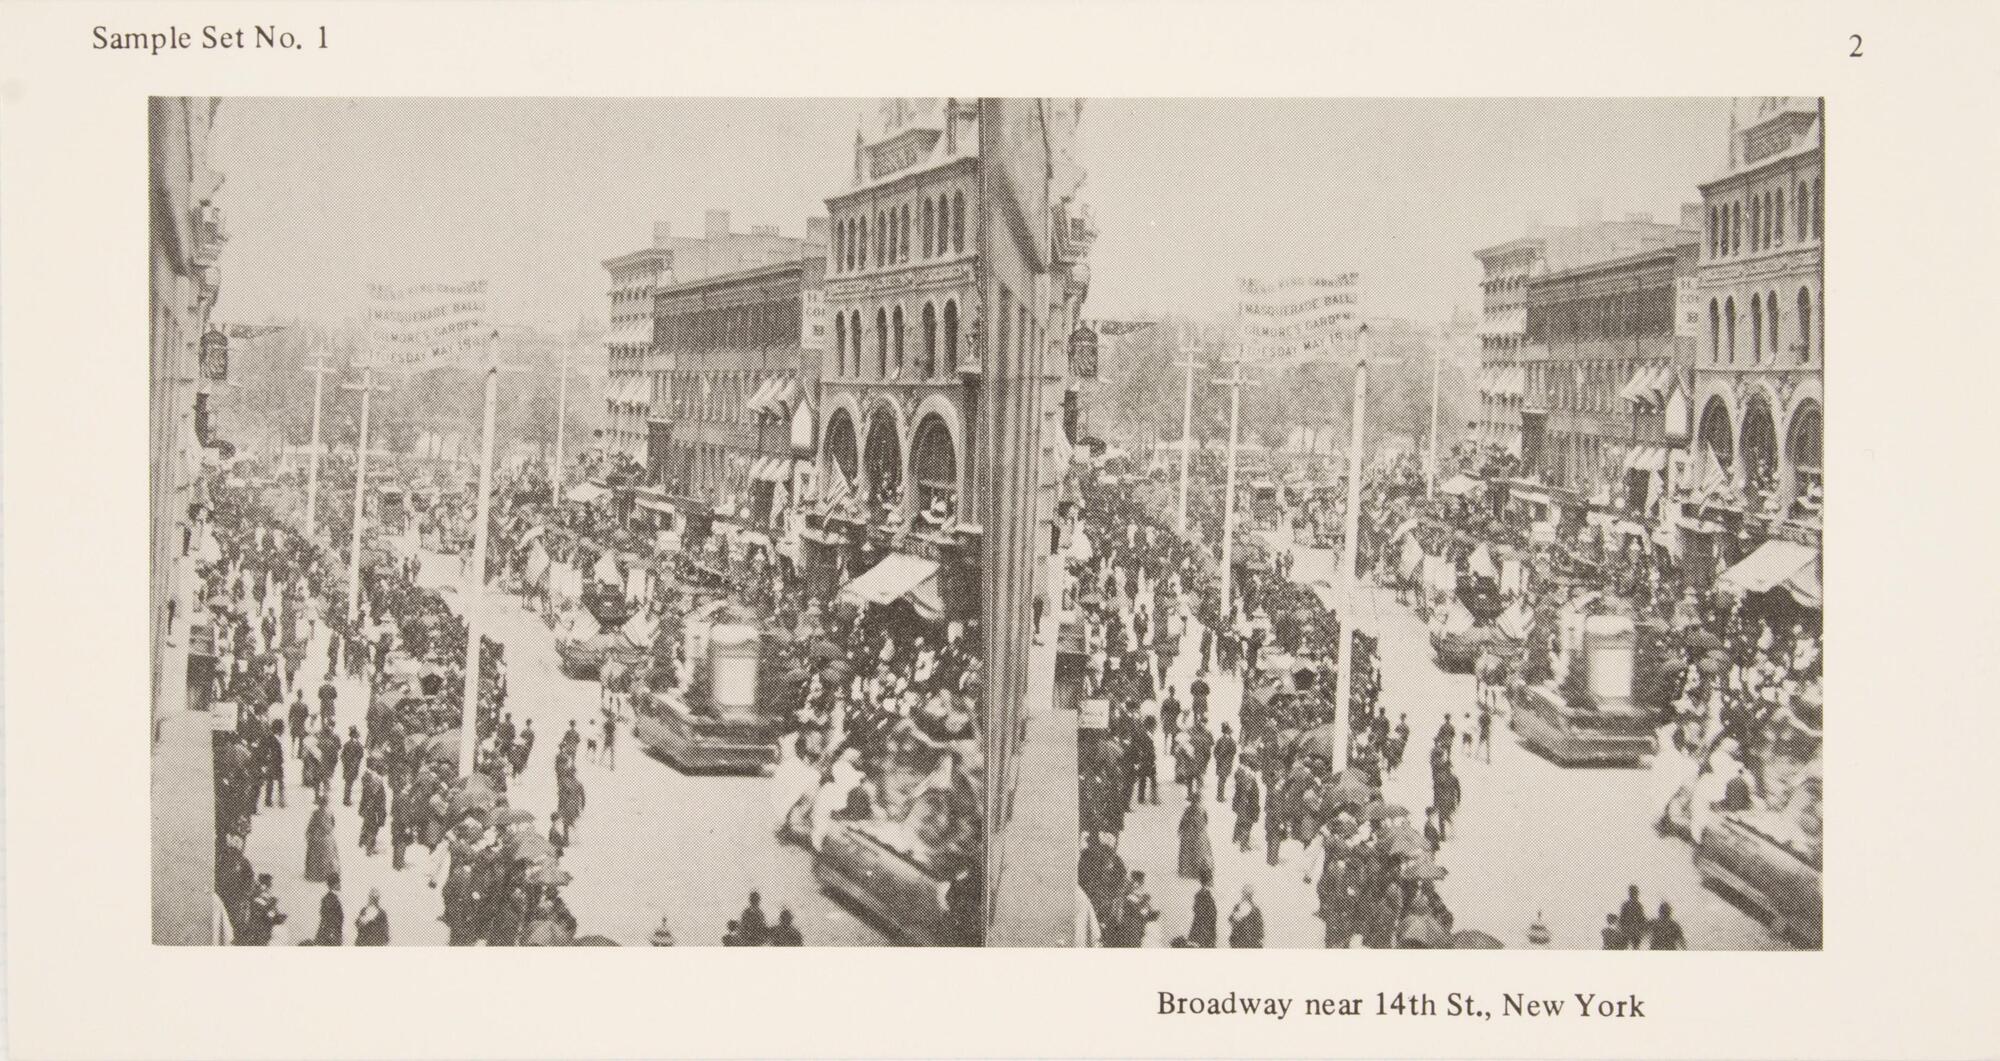 This black and white stereoscopic image features two images of a view of Broadway in New York City with a parade going down the street and people watching on the sidewalks.  It is surrounded by the text: Sample Set No. 1; Broadway near 14th St., New York.<br />